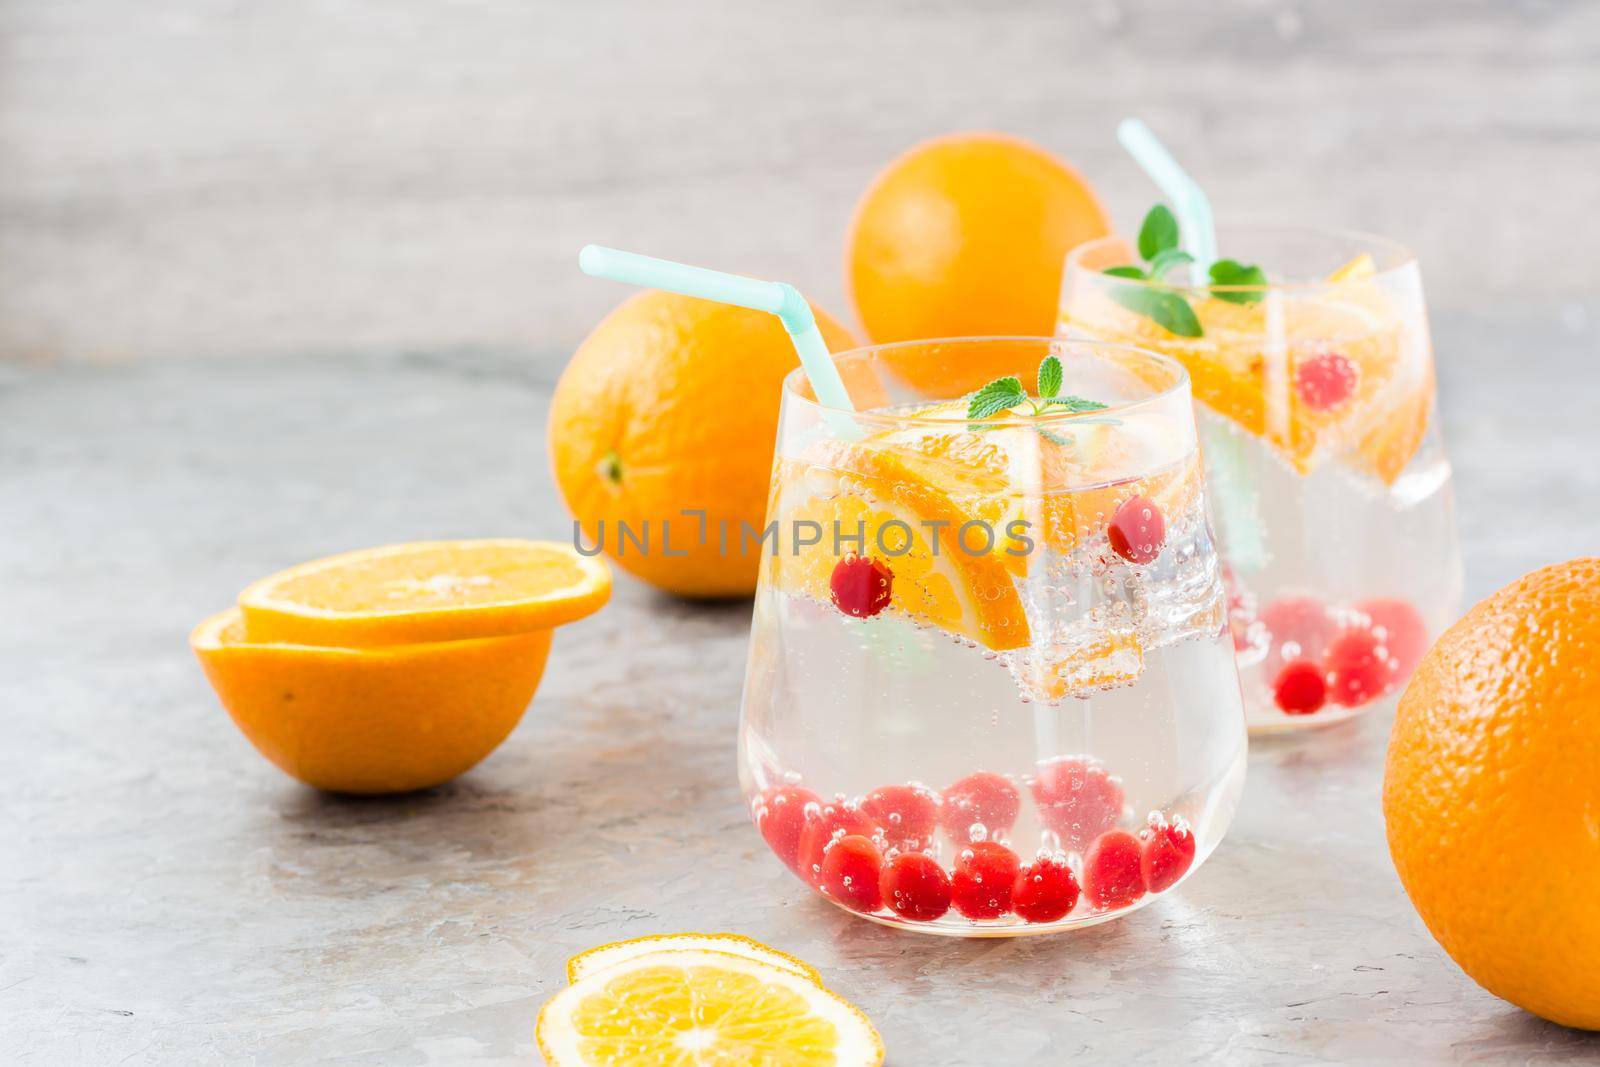 Hard seltzer cocktail with orange, cranberry and mint in glasses and cut oranges on the table. Alcoholic highly carbonated drink by Aleruana